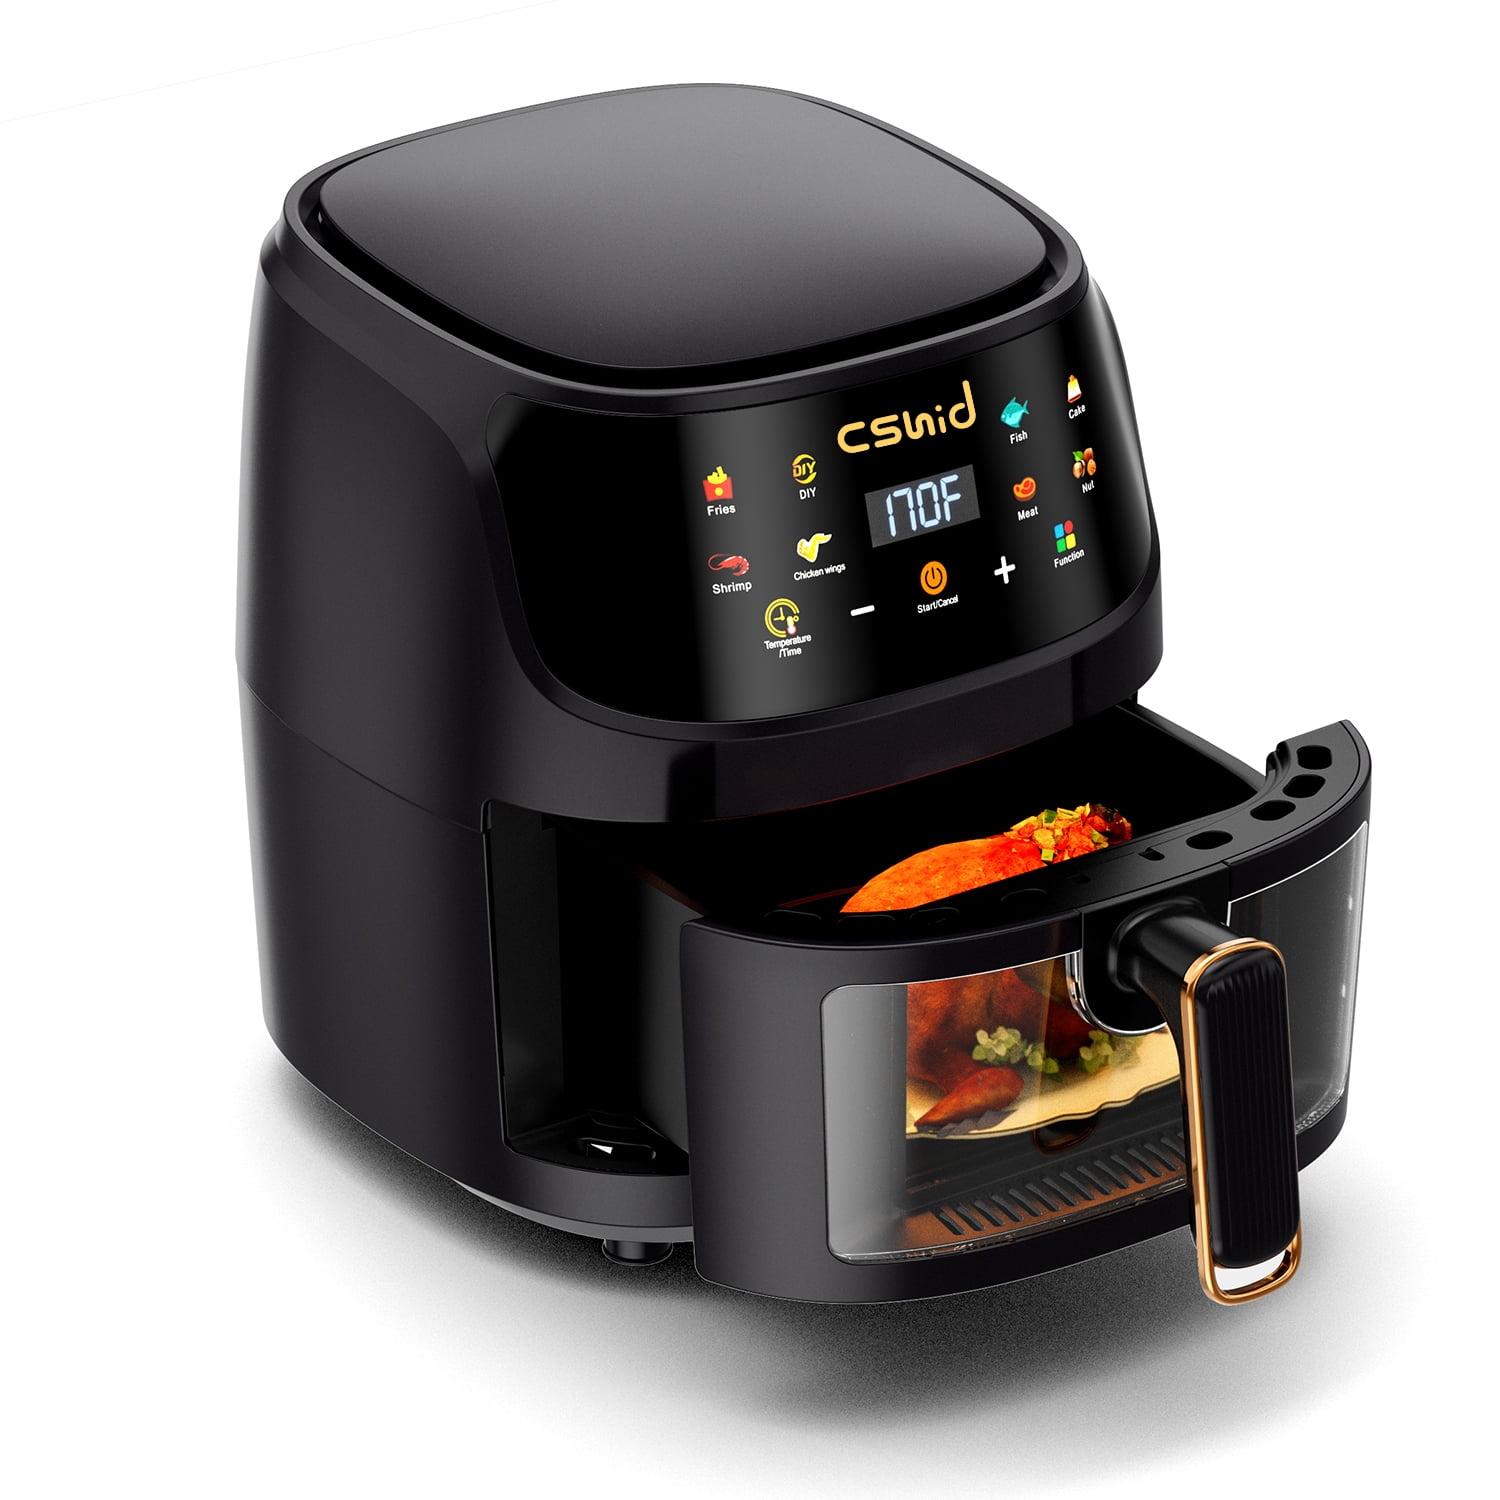 Air Fryer 5L Large Capacity Touch Screen Smart Fryers Household Multi-function Window Visible Air fryer that Crisps, Roasts, Reheats, & Dehydrates - image 1 of 7